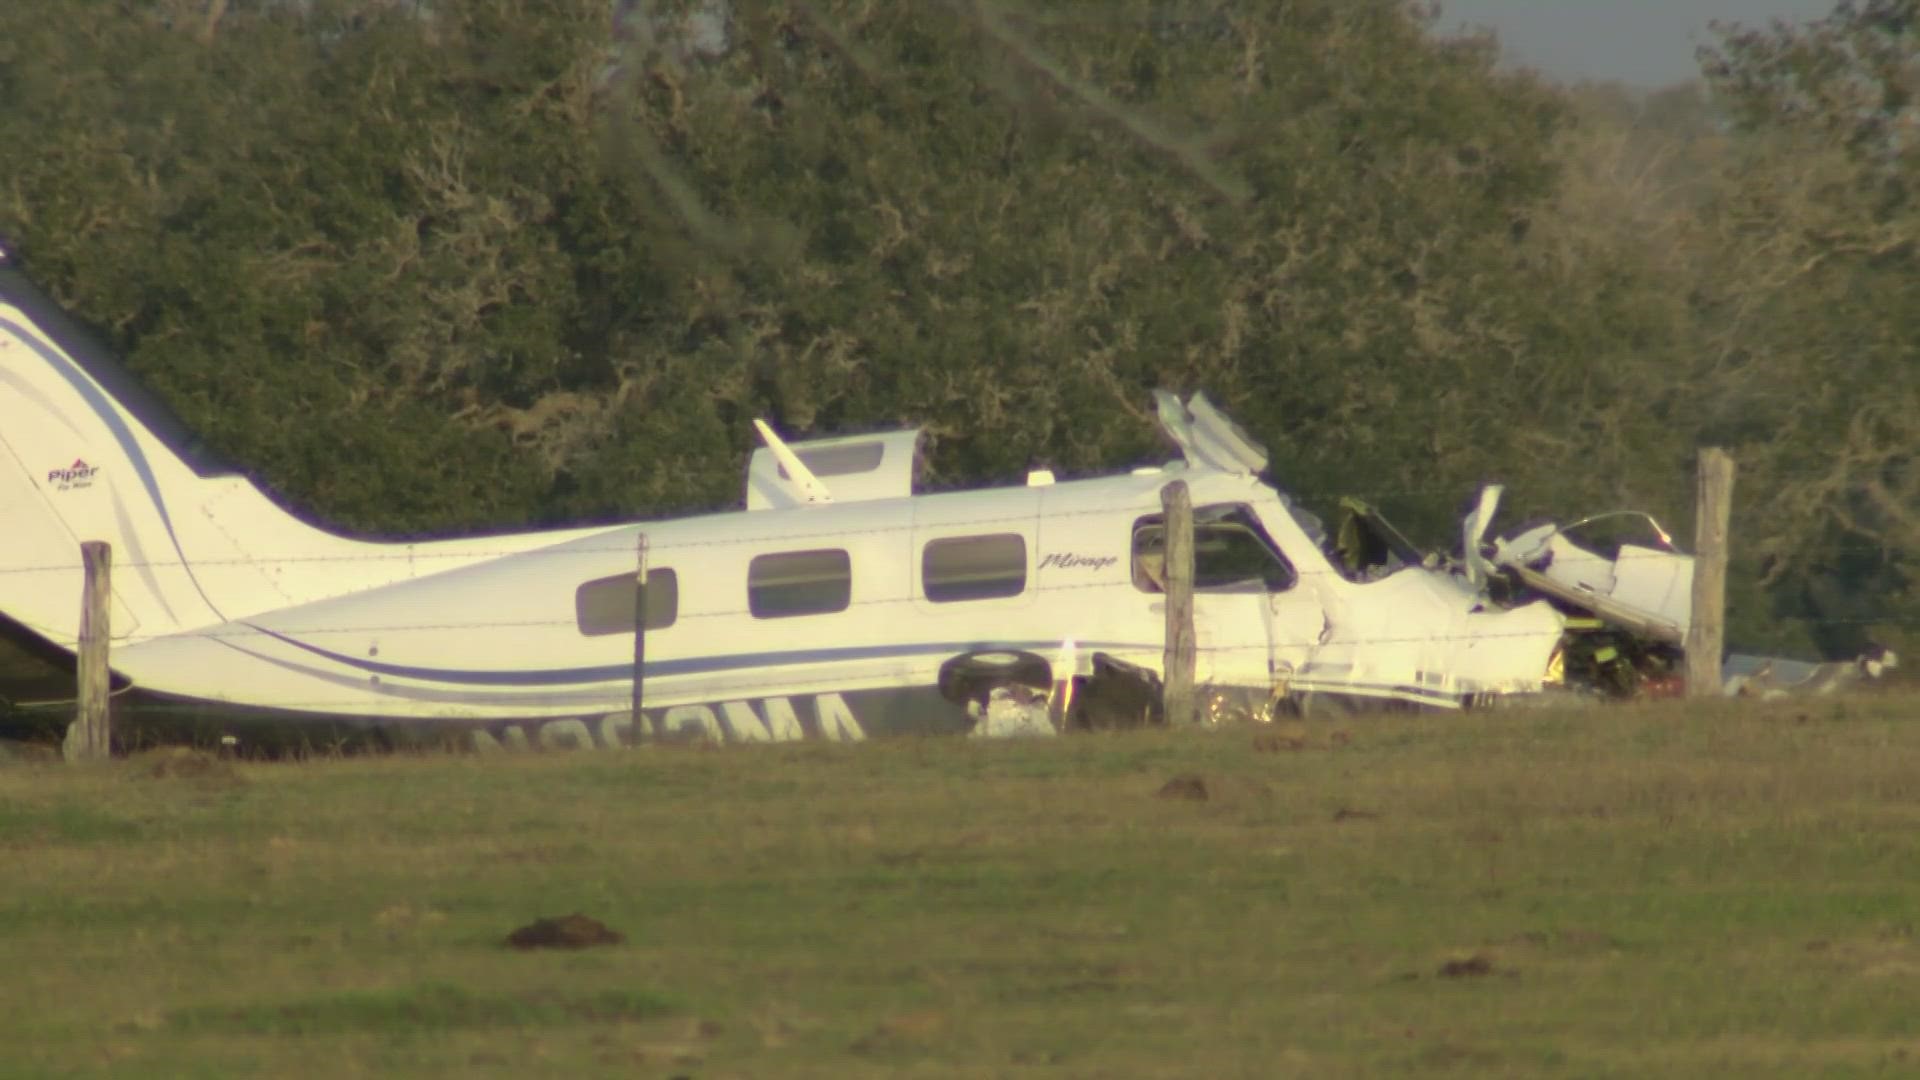 The small plane crashed near Yoakum on Tuesday, and a church in Memphis said all five people on board were members.